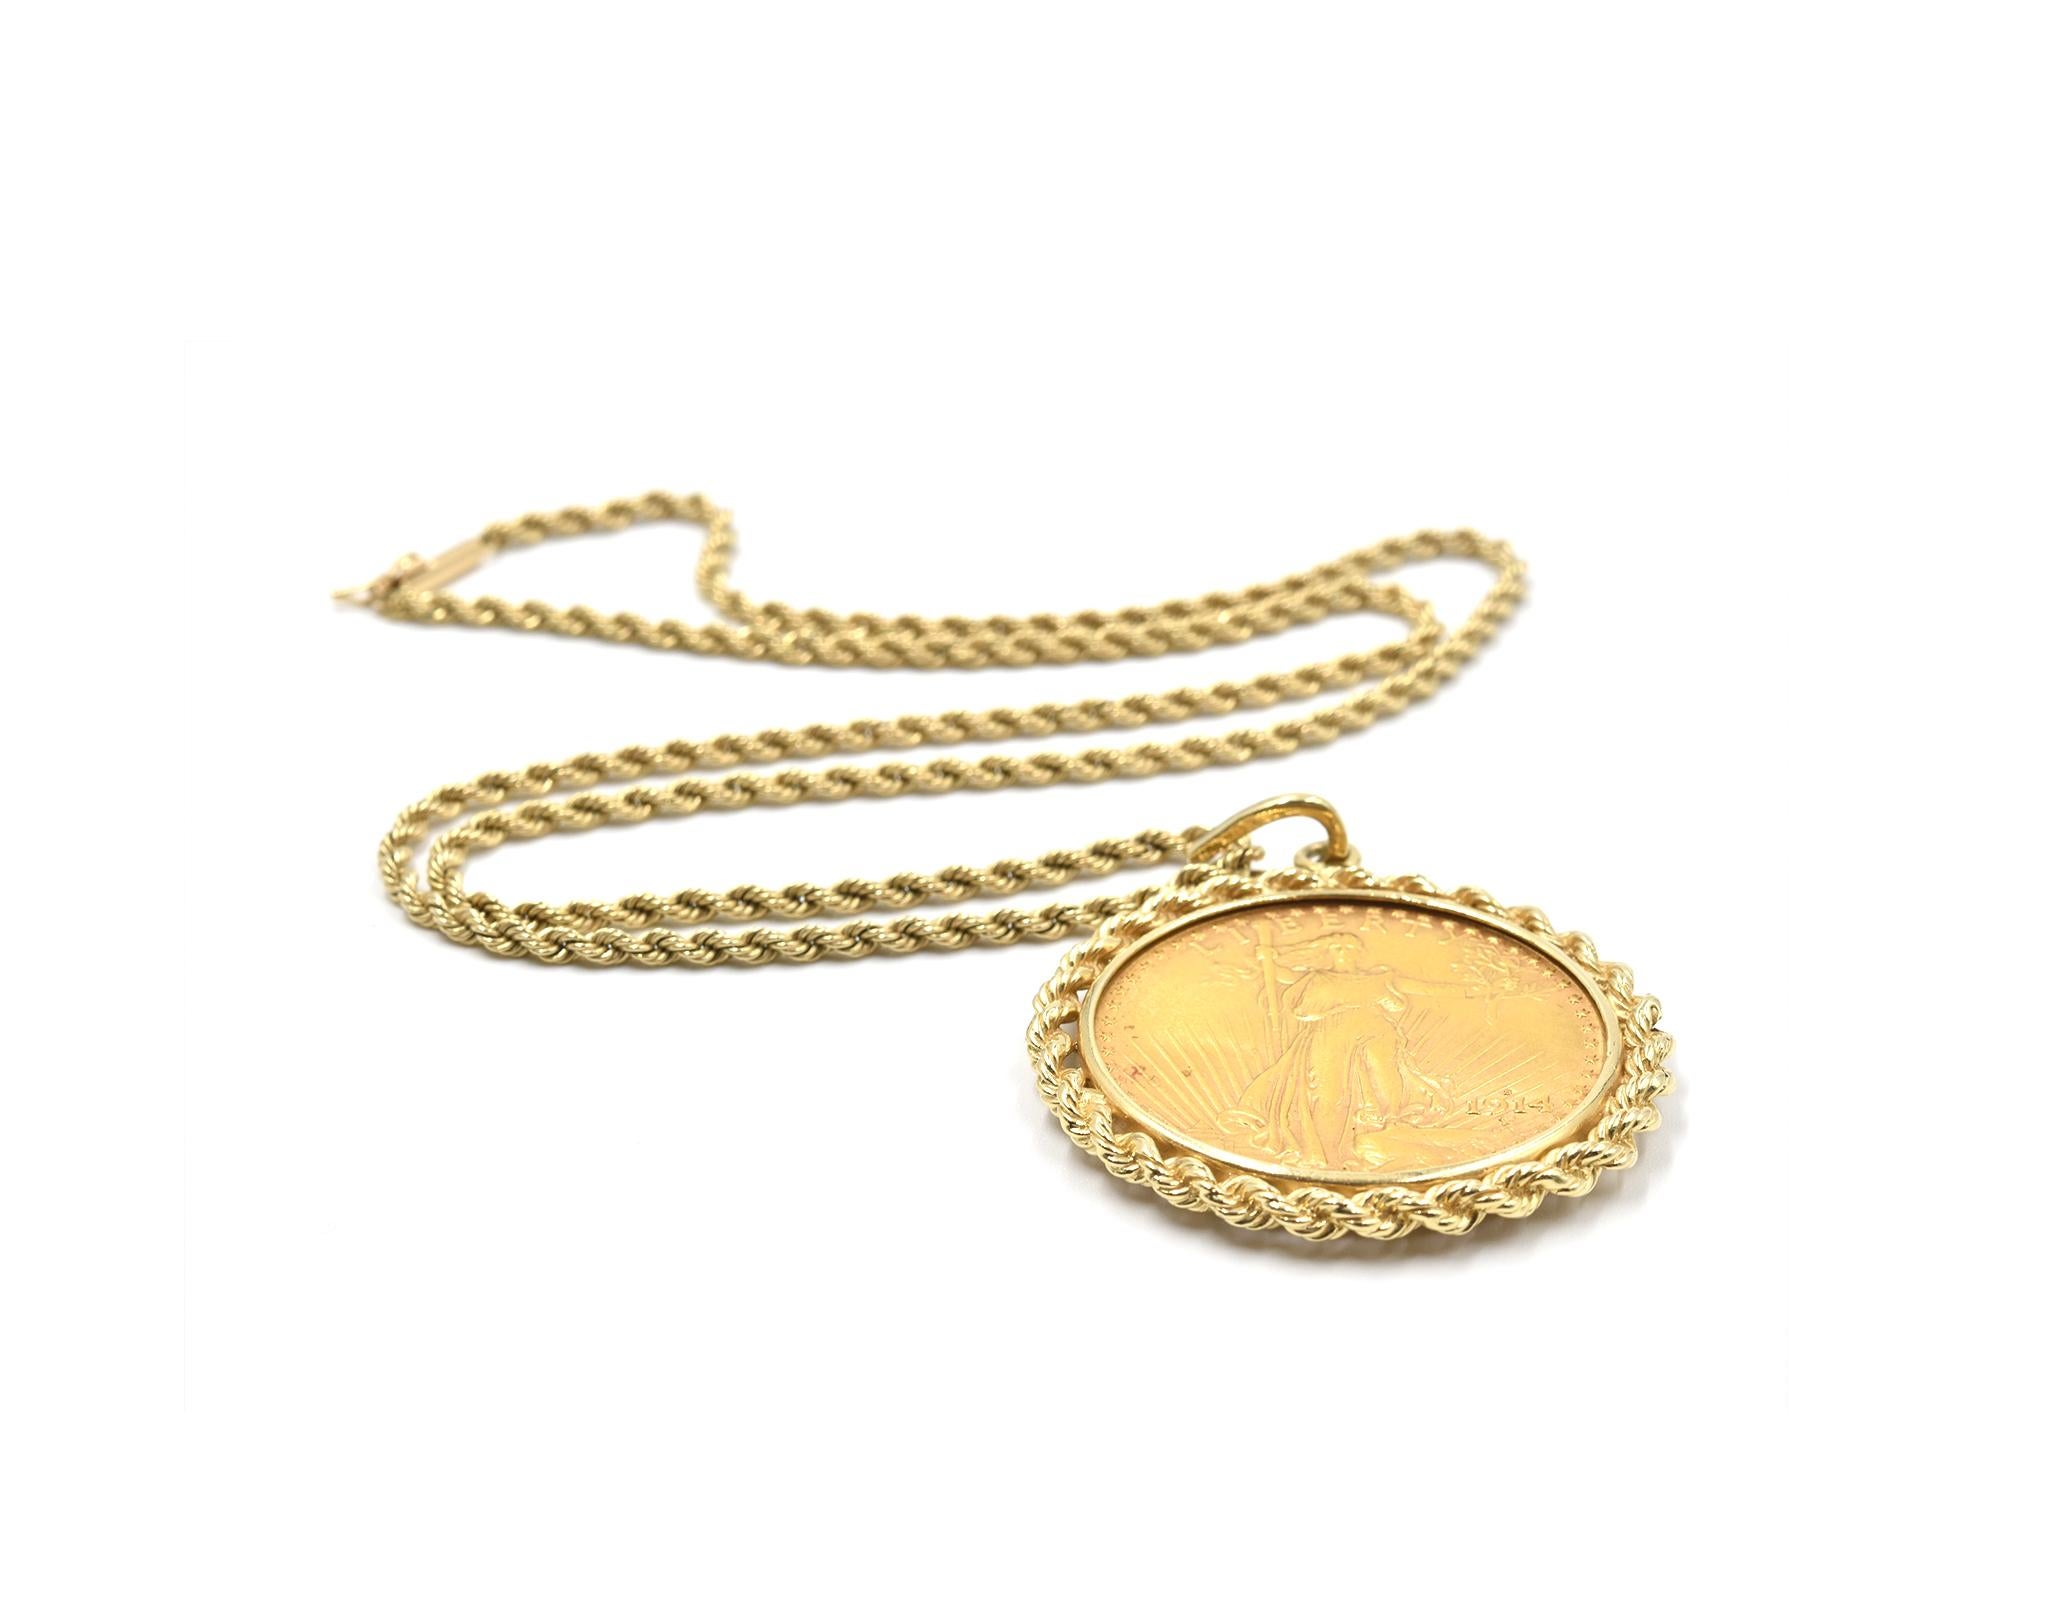 Designer: custom design
Material: 14k yellow gold
Dimensions: pendant measures 2-inch long from bail and 1 3/4-inch in diameter, necklace is 20-inch long and 1/8-inch wide, necklace with pendant measures 22-inch long
Weight: 52.94 grams
